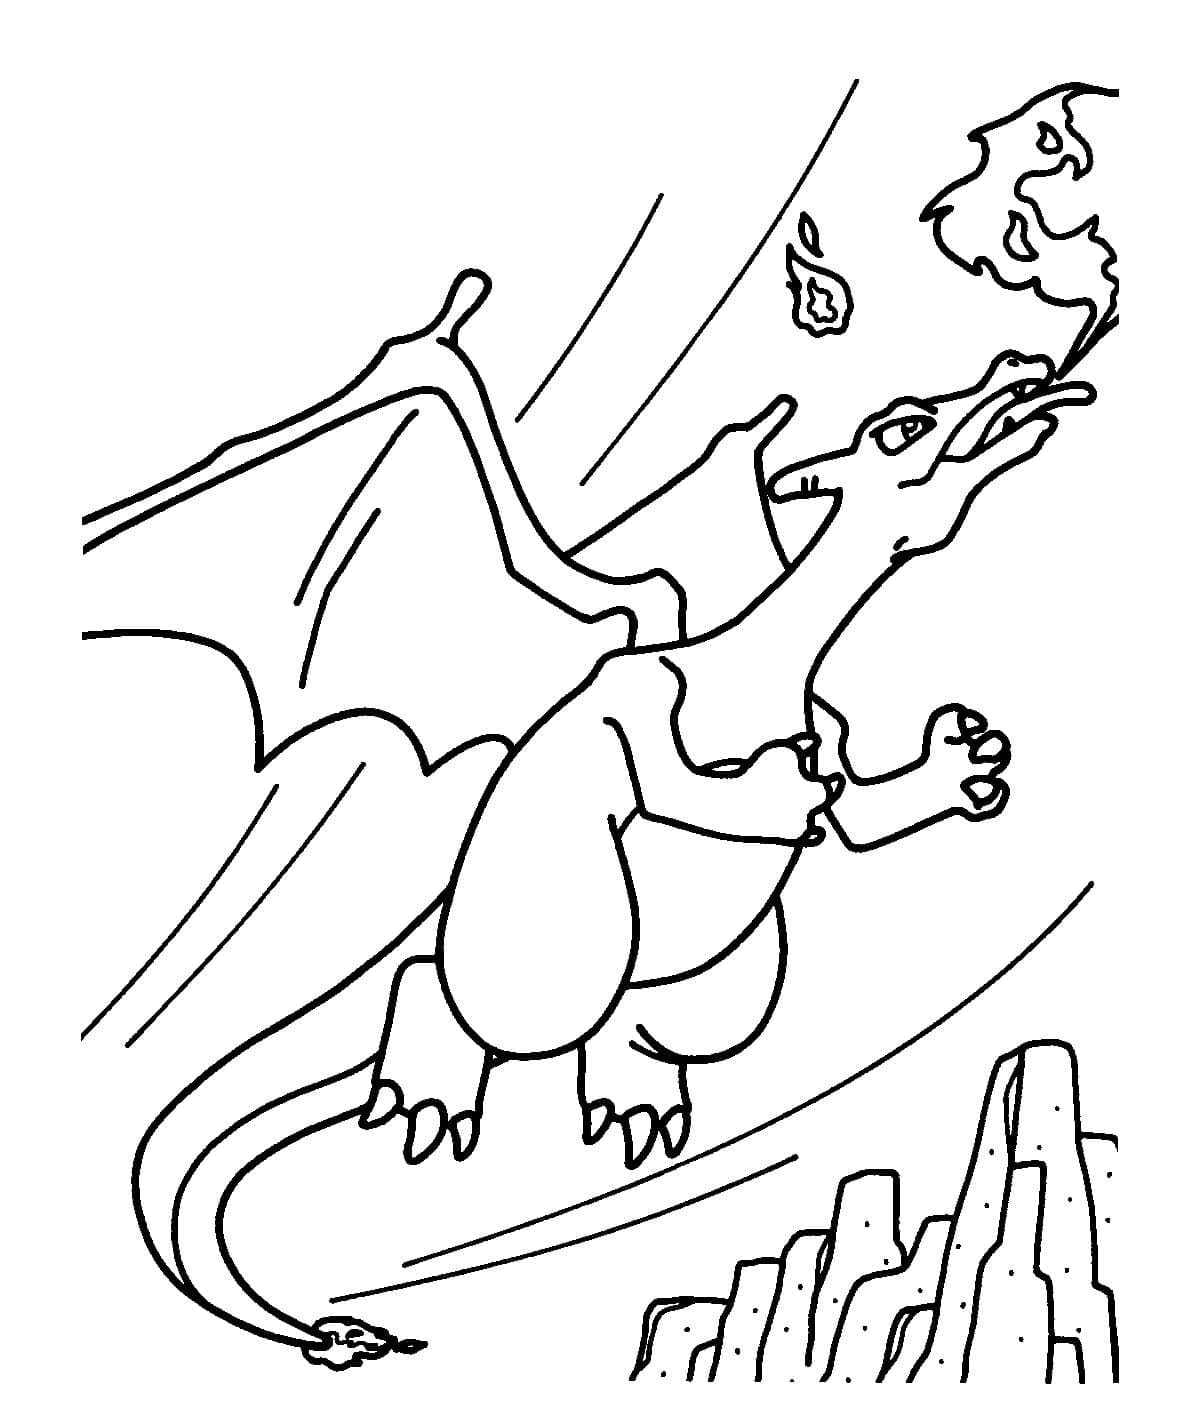 pokemon charmeleon printable coloring pages